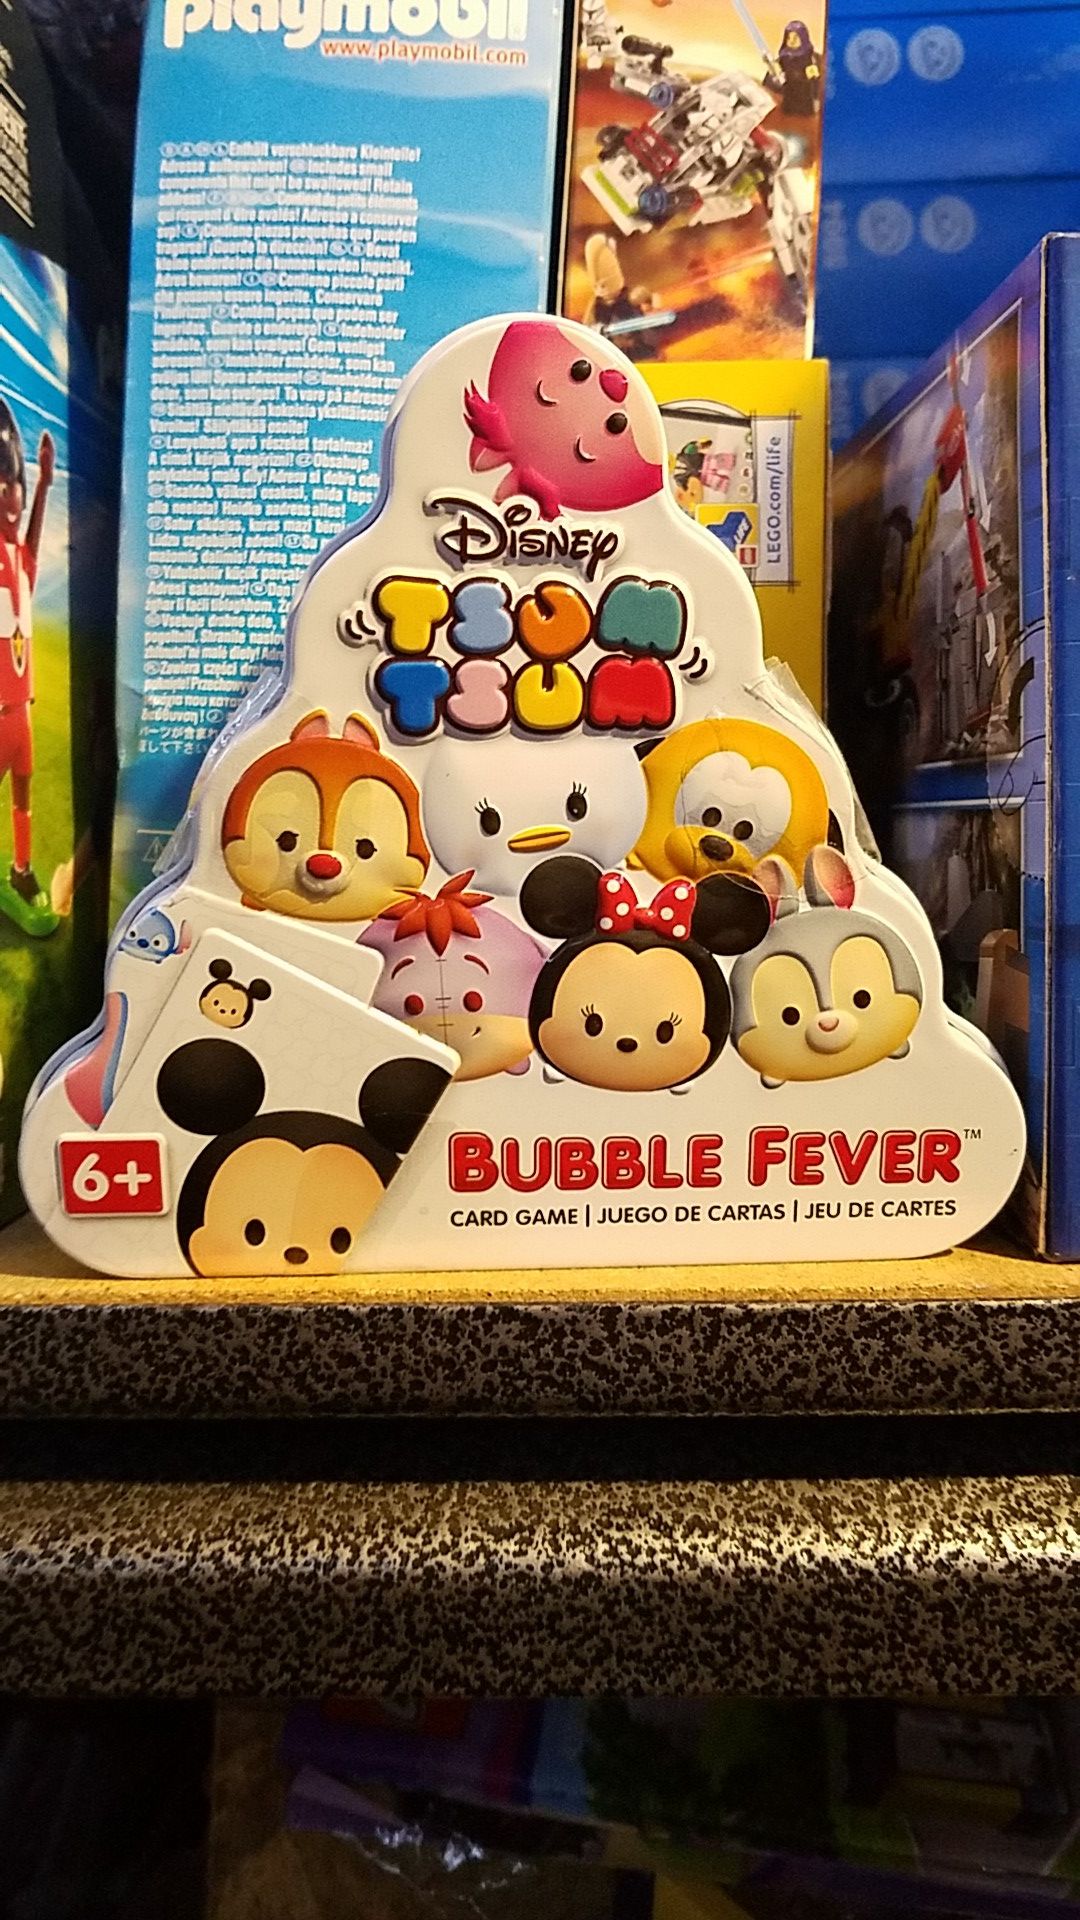 Disney Tsum Tsum Bubble Fever Sealed Card Game (and many more to choose from!)